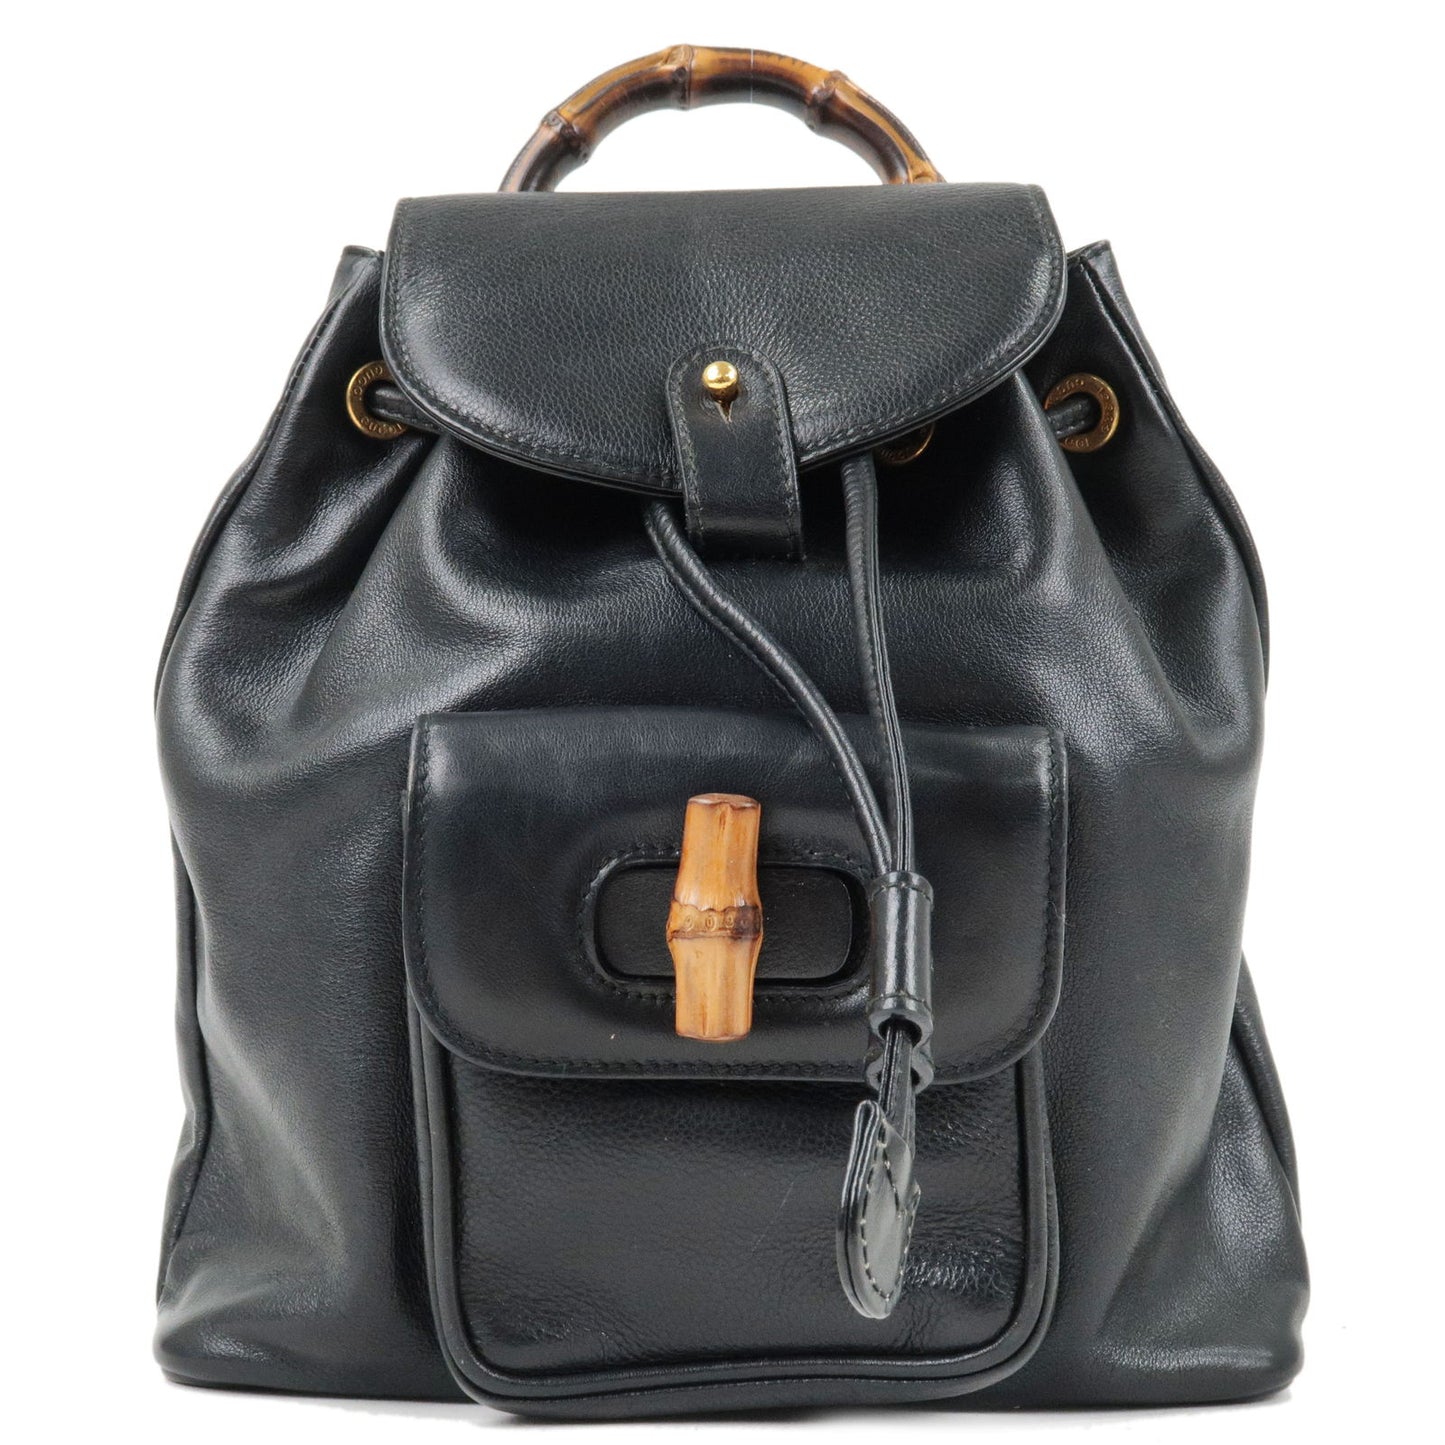 GUCCI-Bamboo-Leather-Ruck-Sack-Back-Pack-Black-003.58.0030